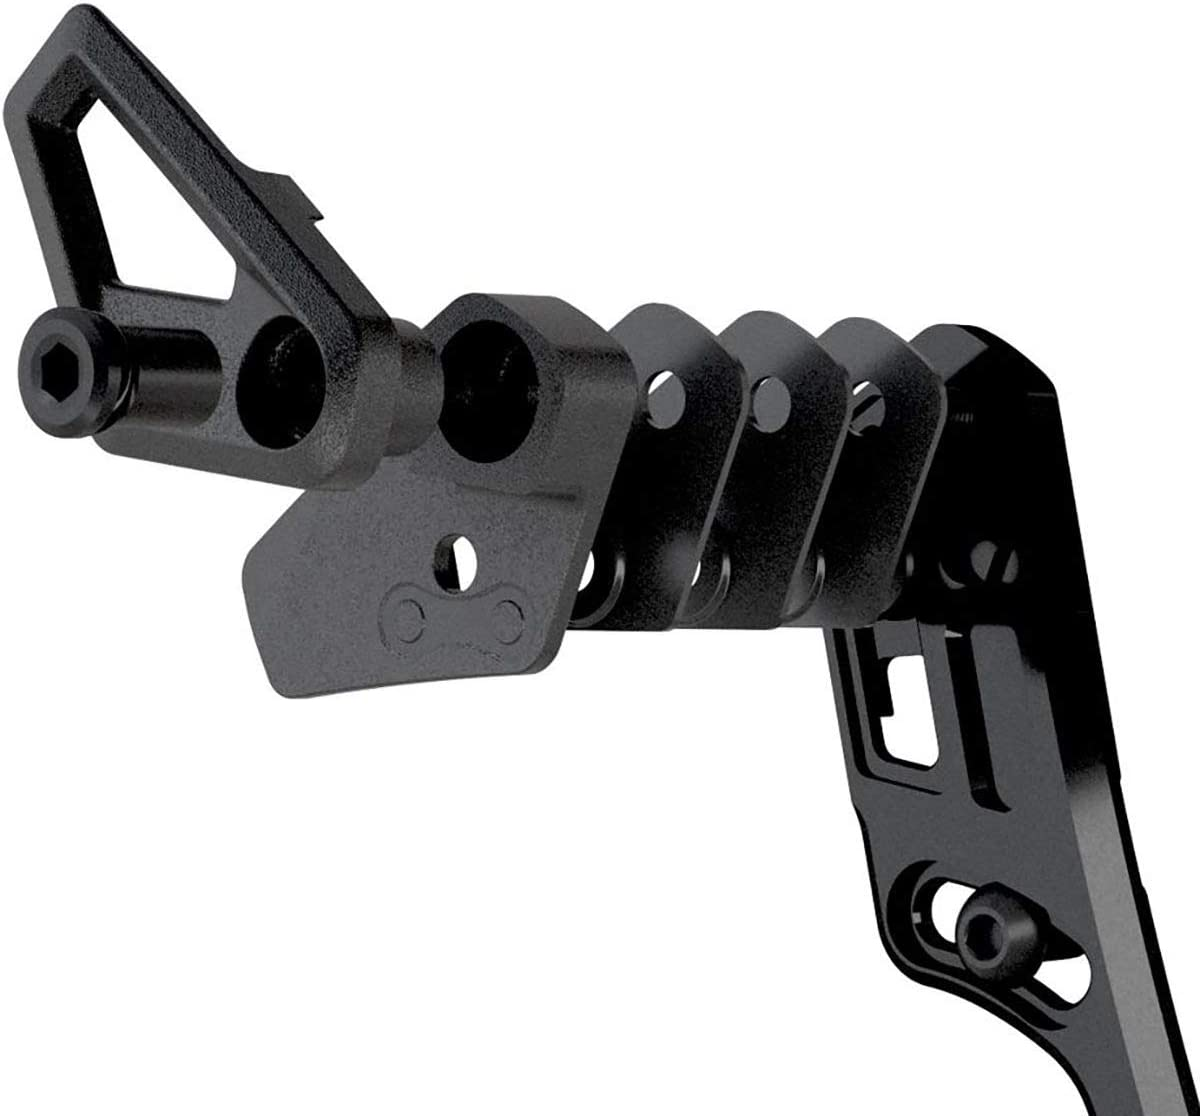 Check to see whether you need to add spacers when installing your chain guide.